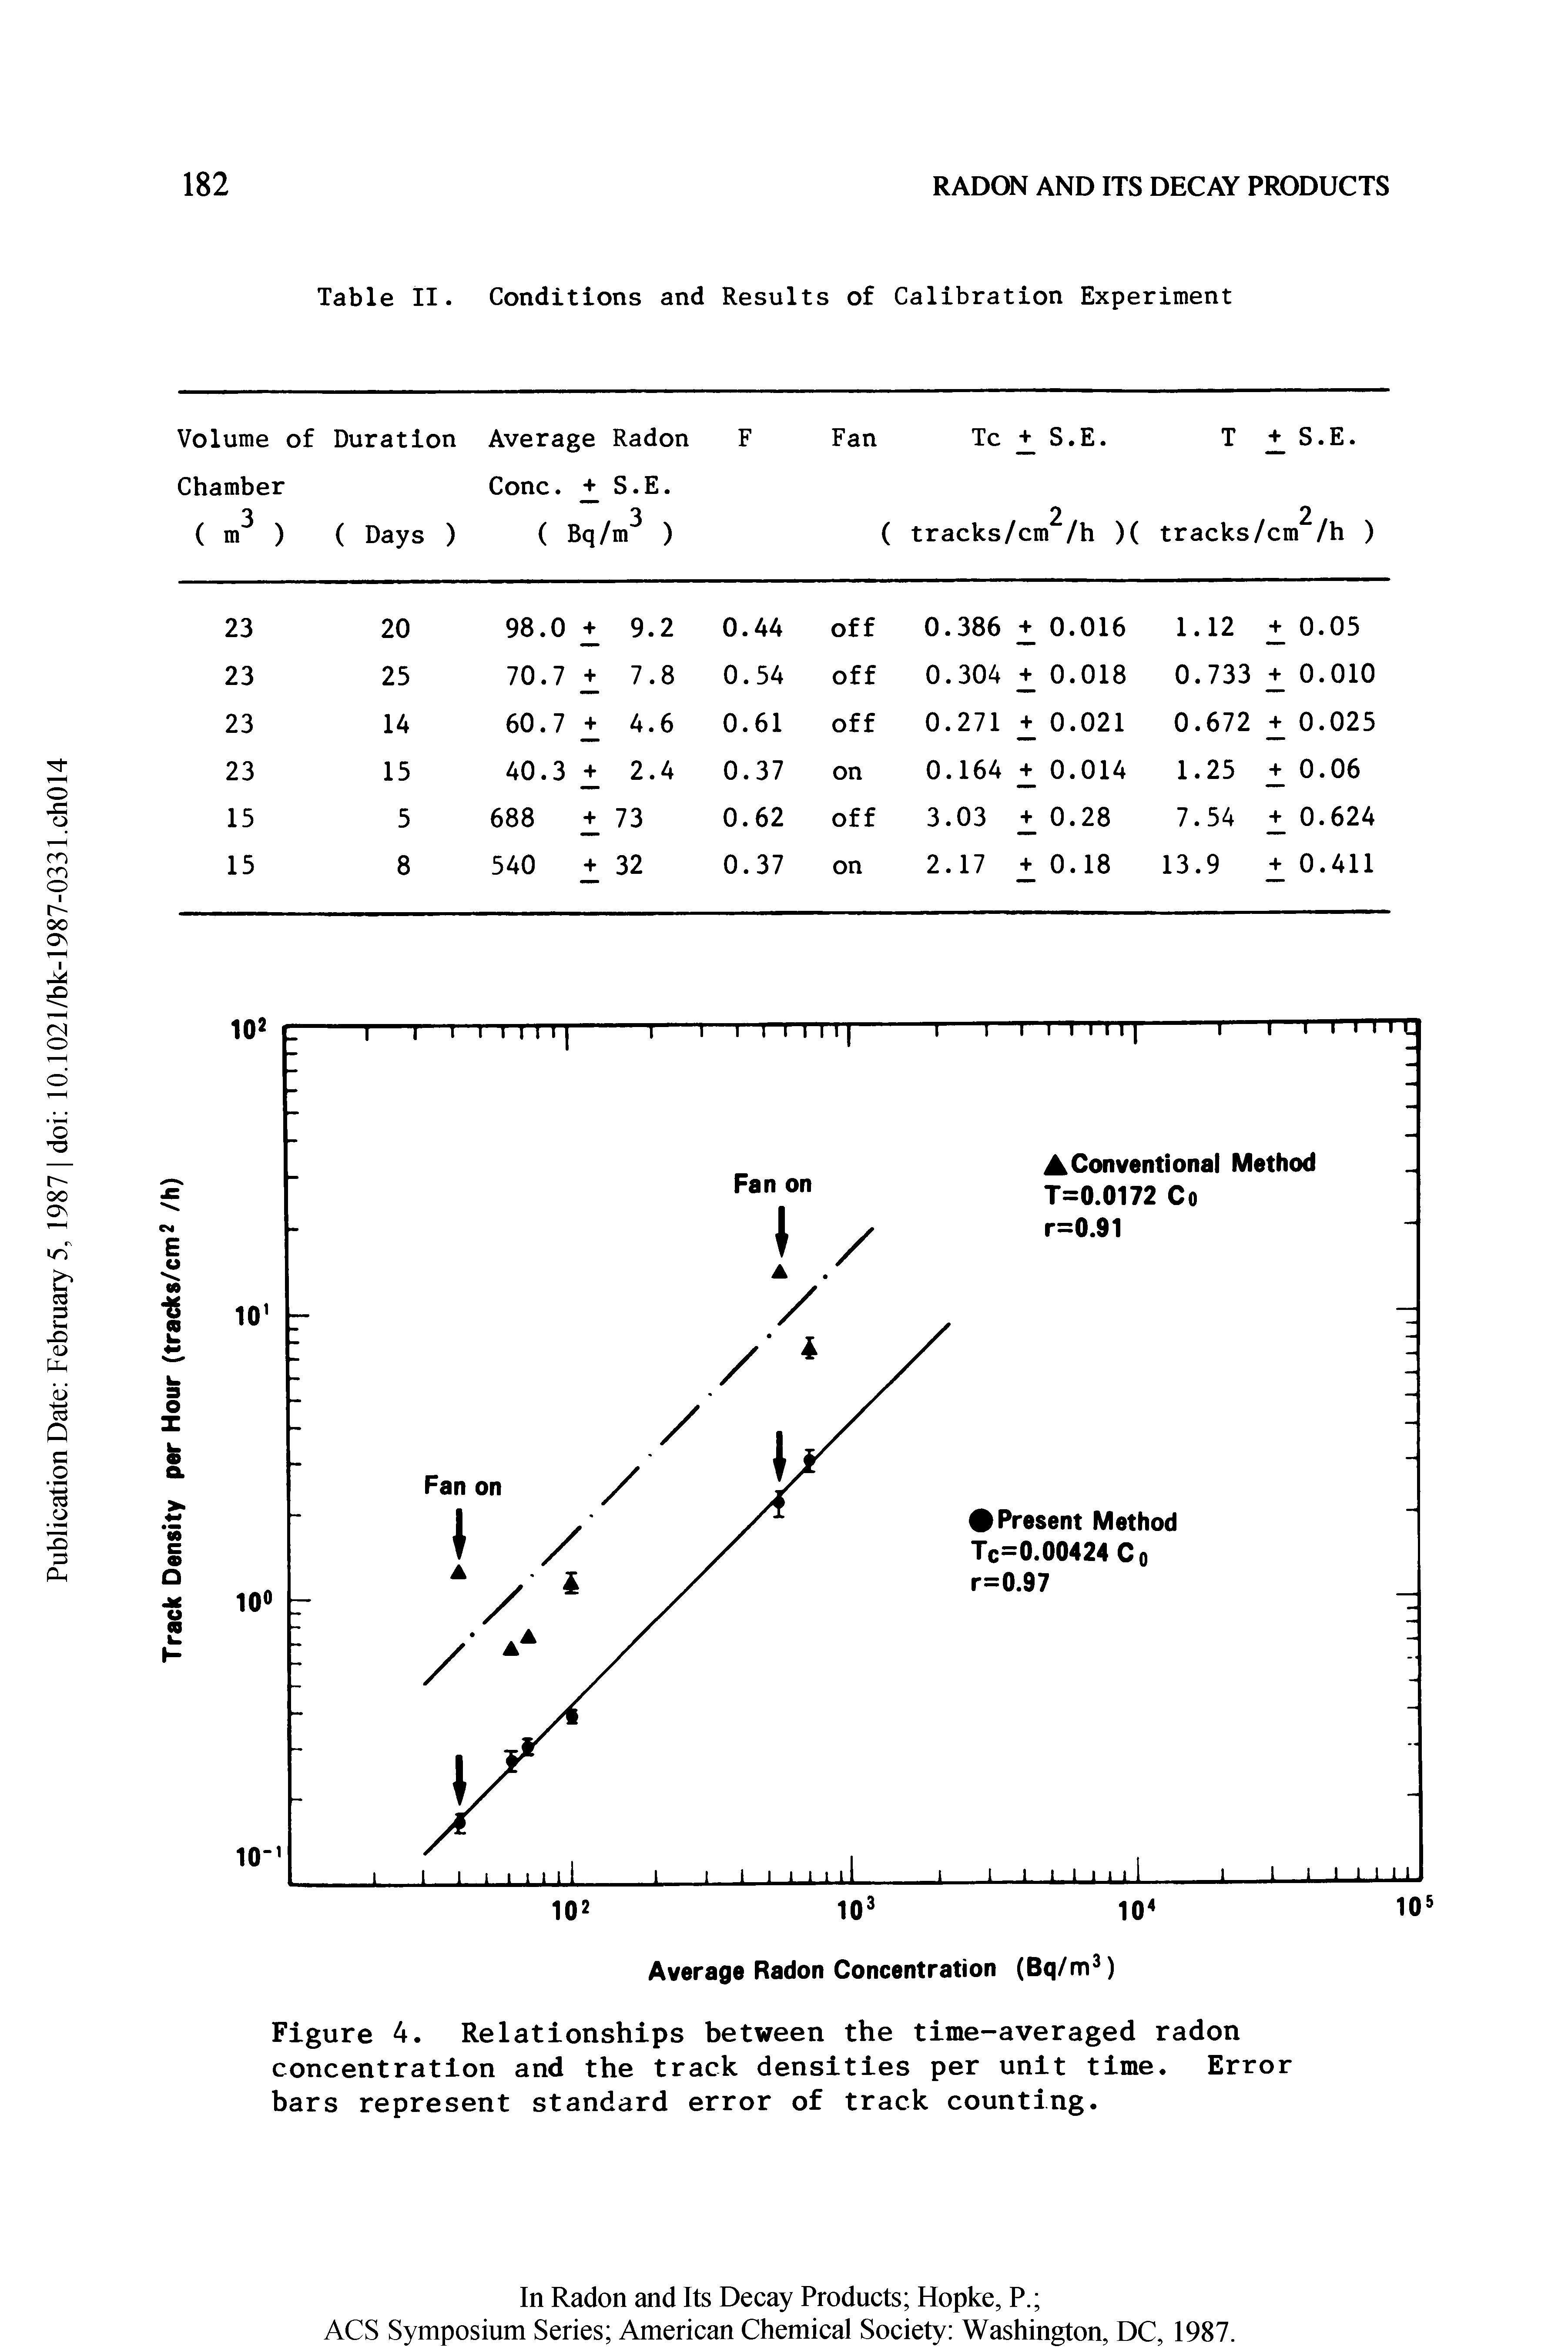 Figure 4. Relationships between the time-averaged radon concentration and the track densities per unit time. Error bars represent standard error of track counting.